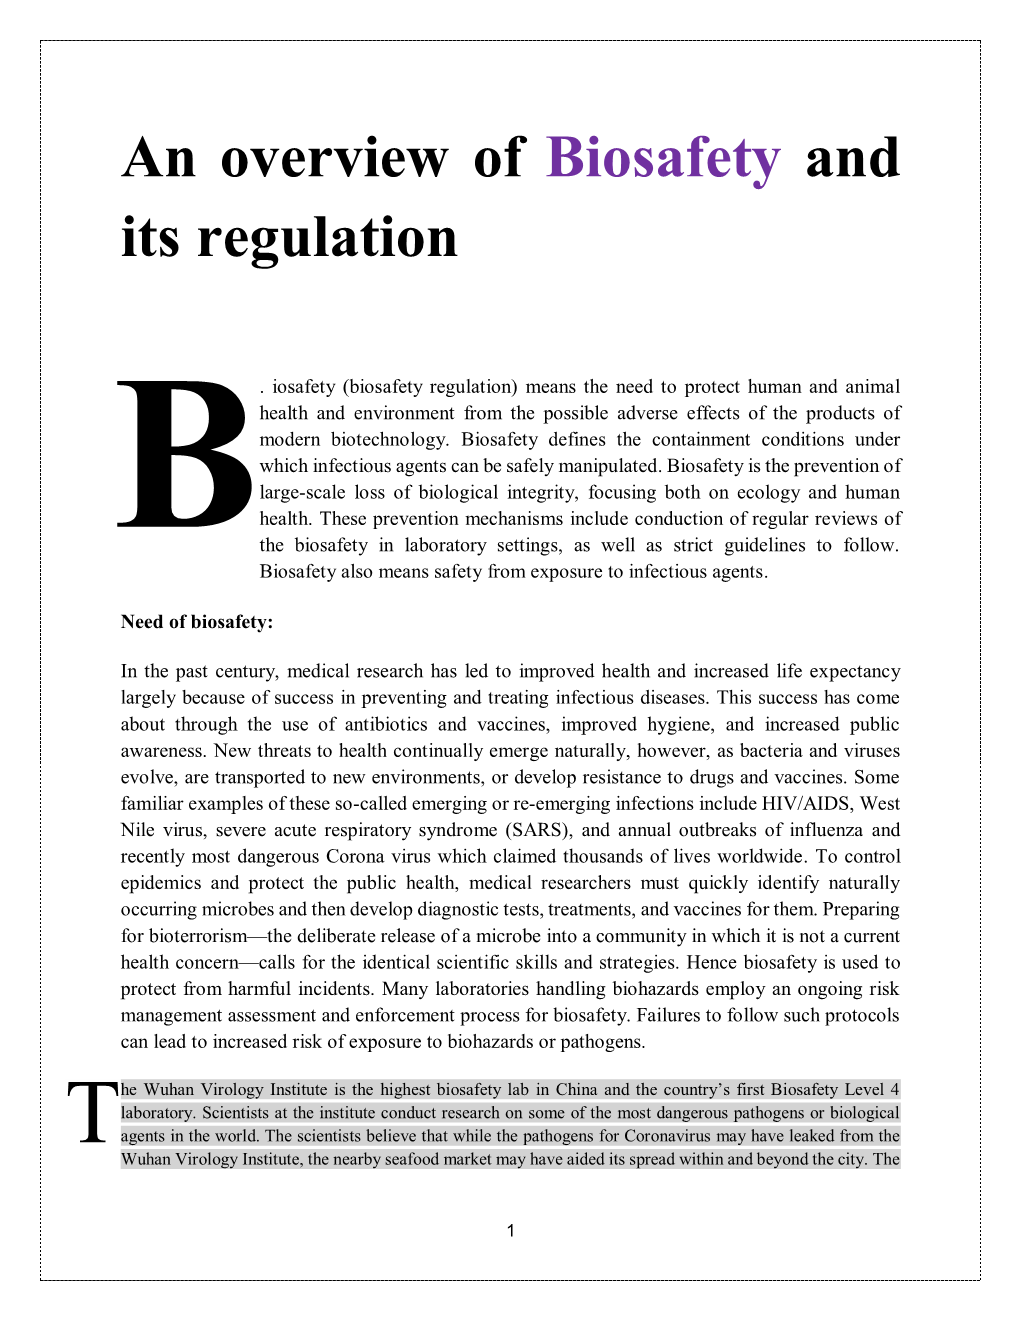 An Overview of Biosafety and Its Regulation